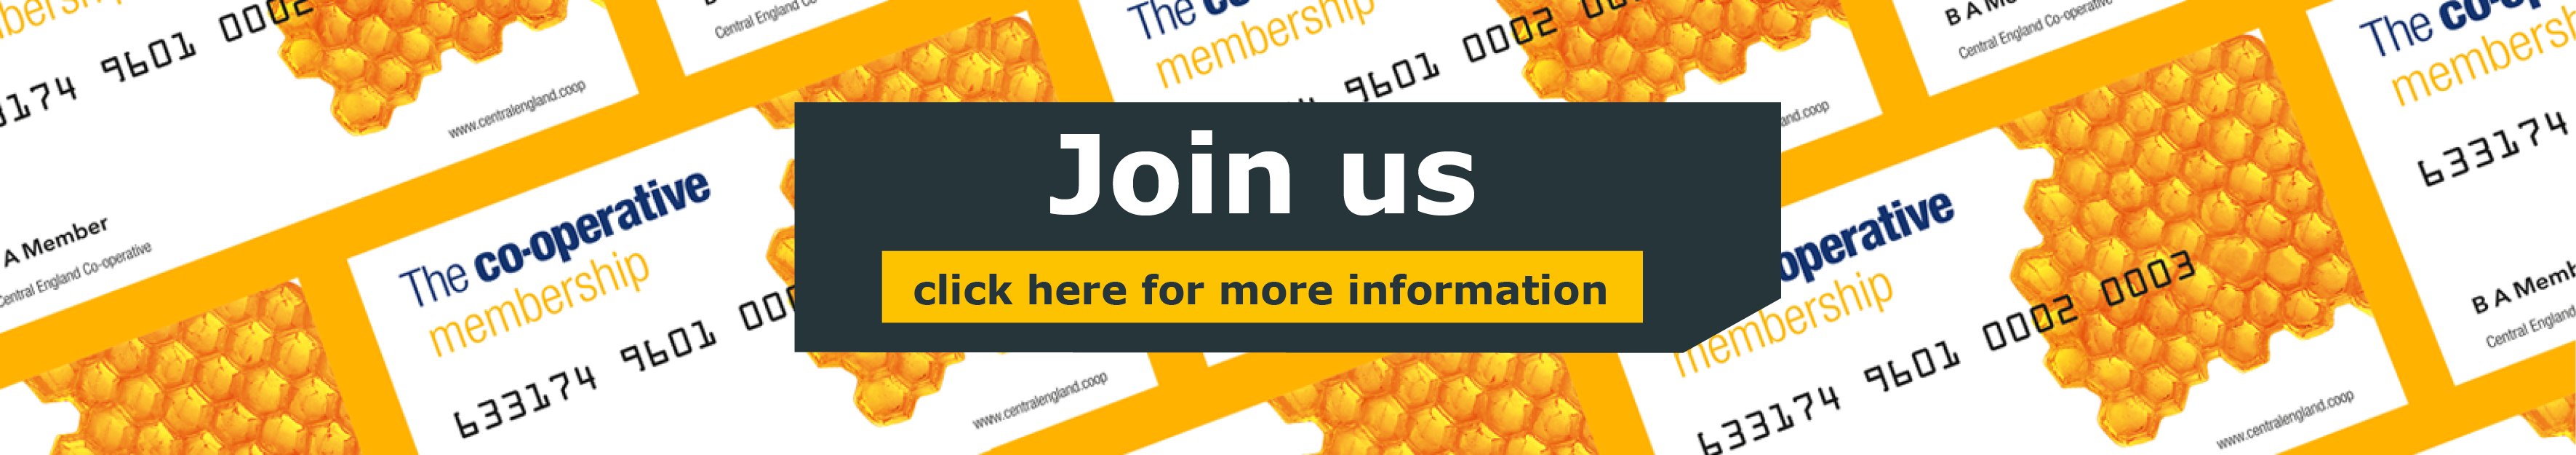 Become a Member, join today